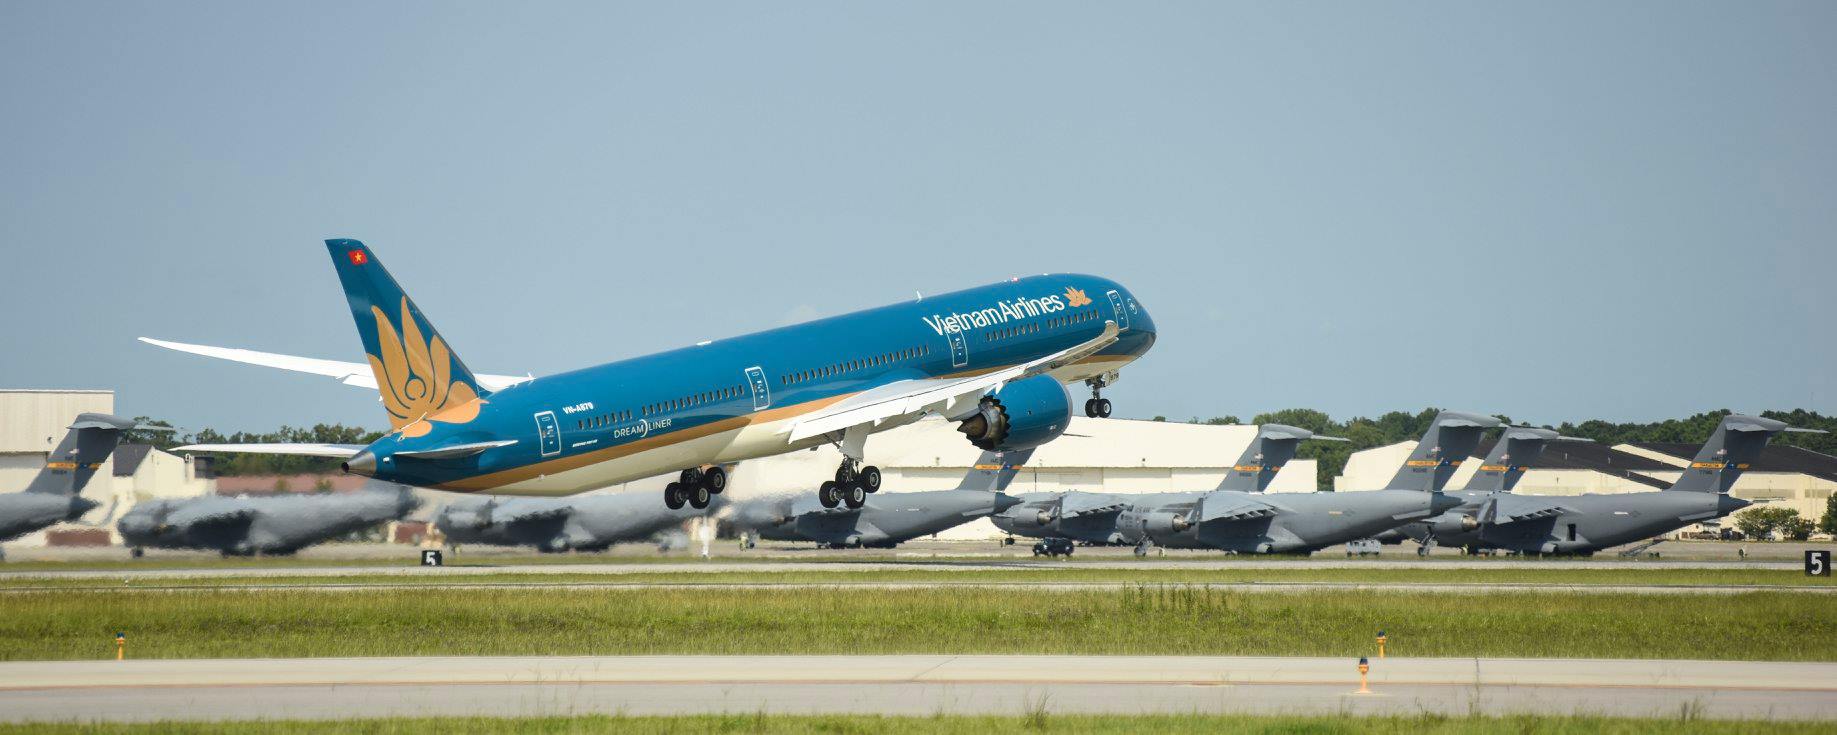 Vietnam Airlines to connect Mumbai to Hanoi and Ho Chi Minh City   